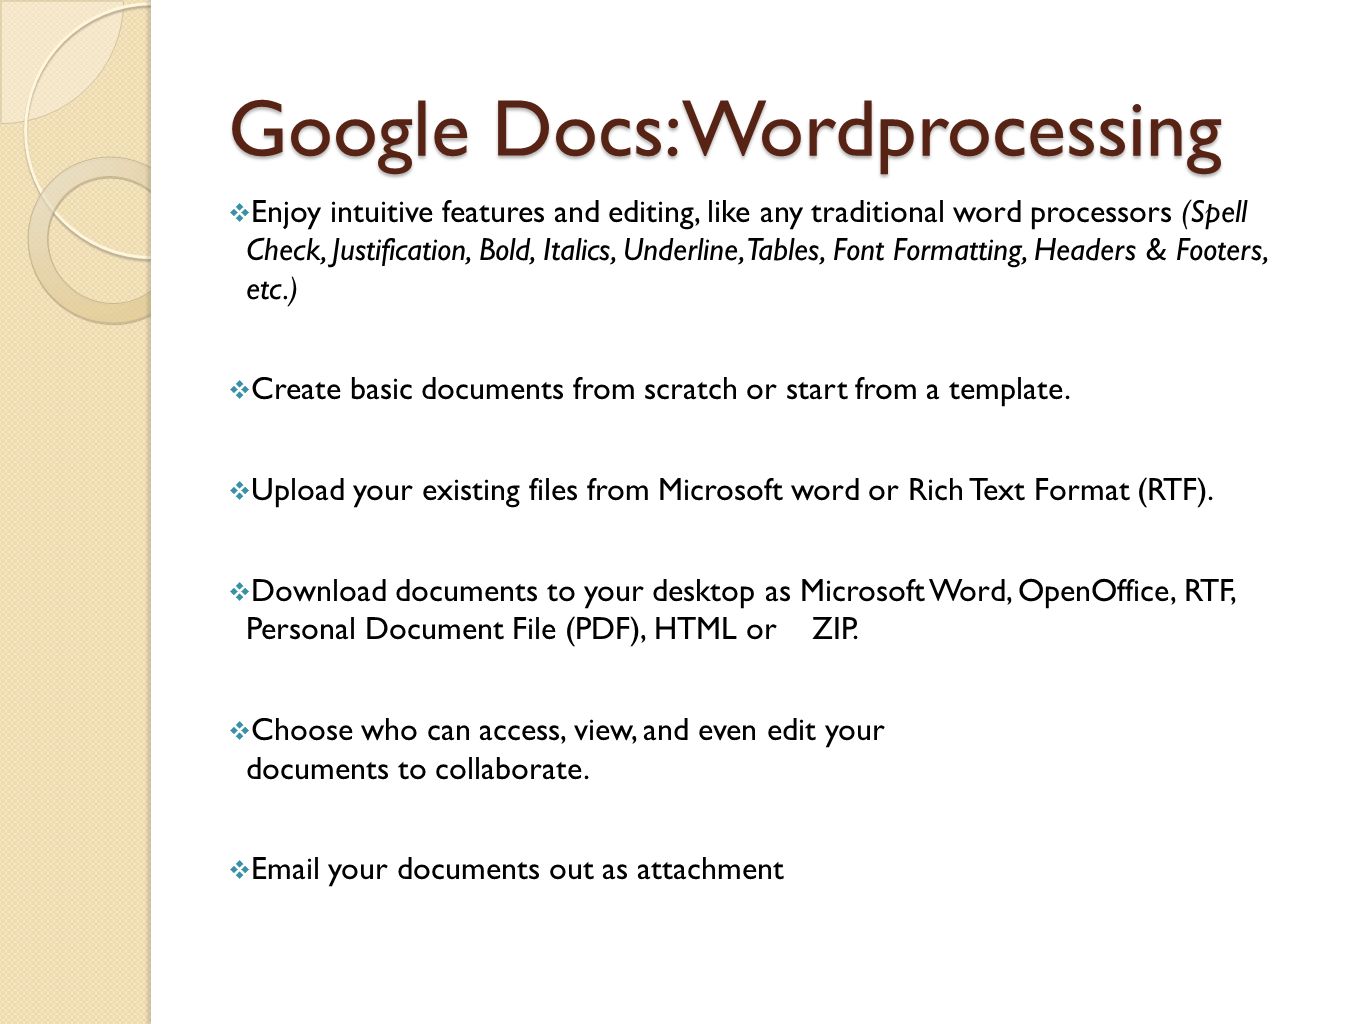 GOOGLE DOCS FEATURES  Share your project documents and other useful resource materials  Allow your collaborators to view and edit online documents  Organize your project collaboration in one online location with added benefits of search and chat options